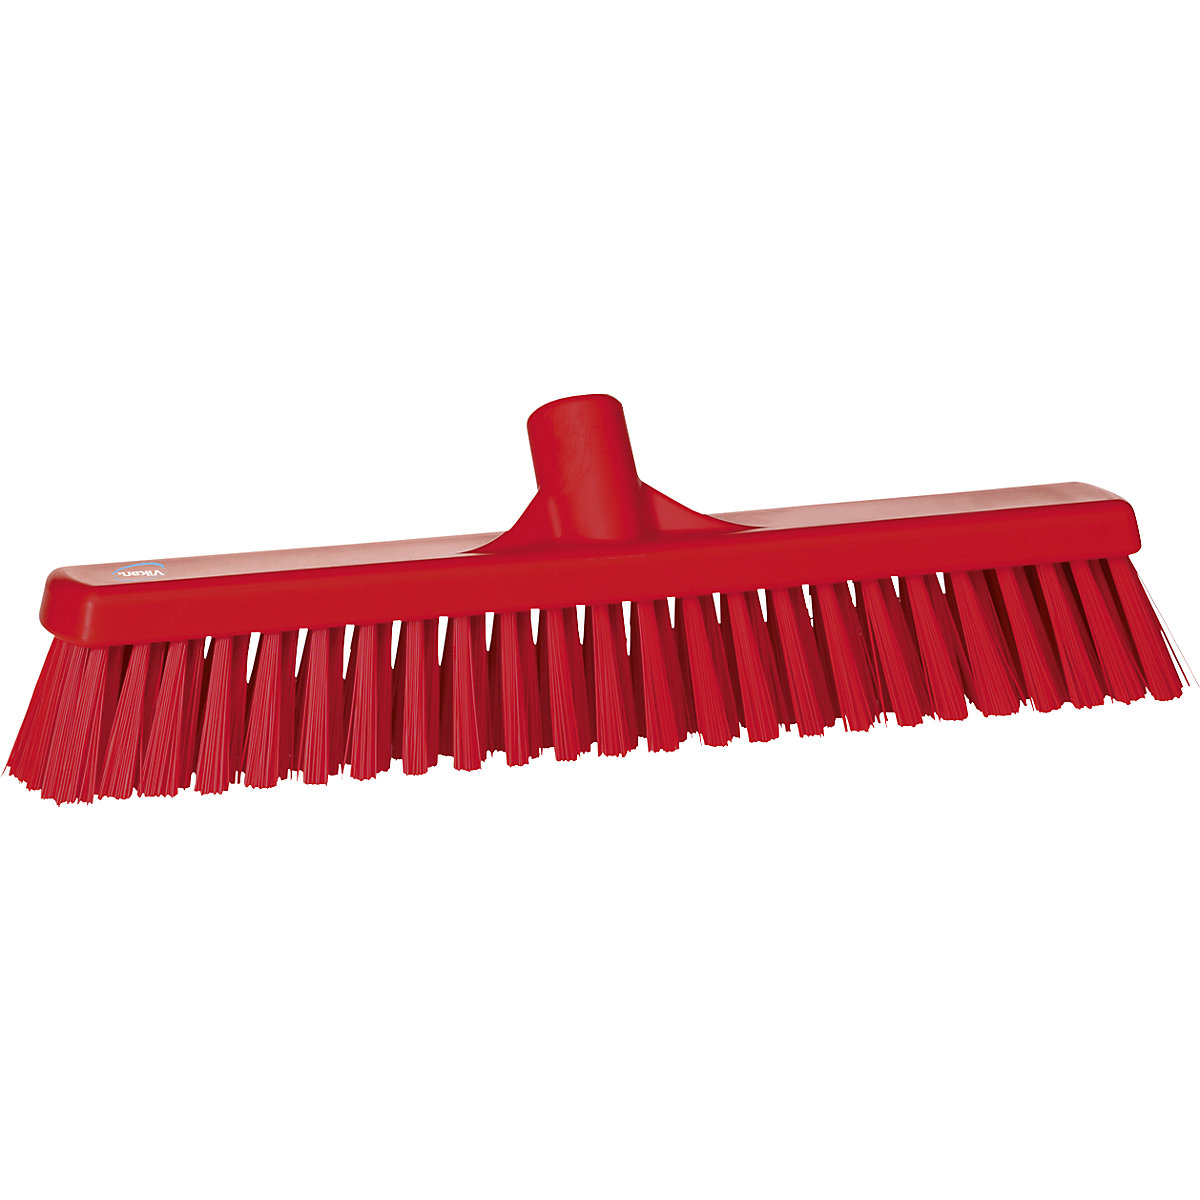 Vikan – Broom, width 410 mm, soft/hard, pack of 10, red